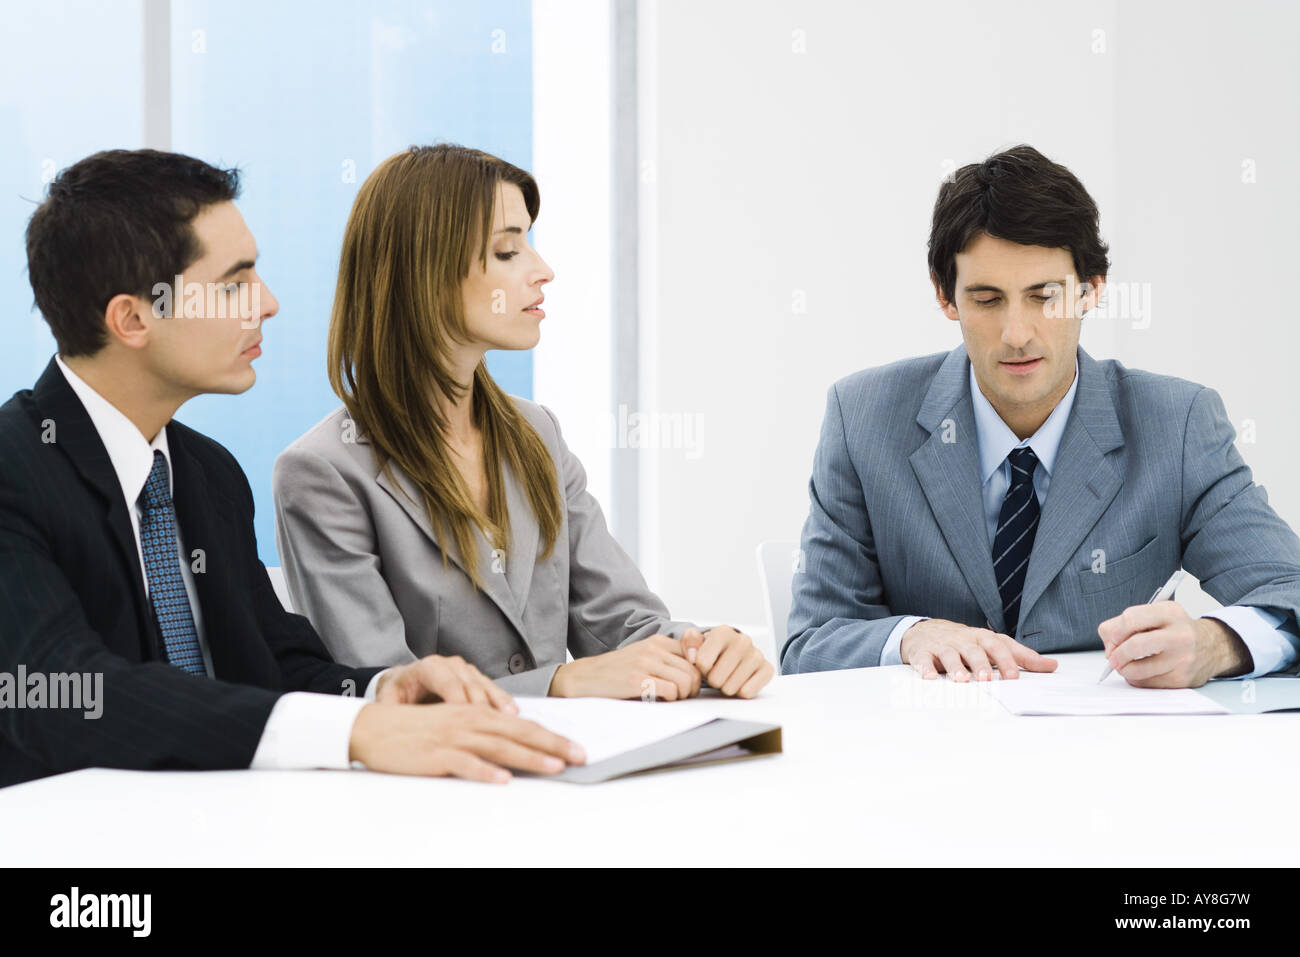 Business associates in meeting, man signing document while others watch Stock Photo